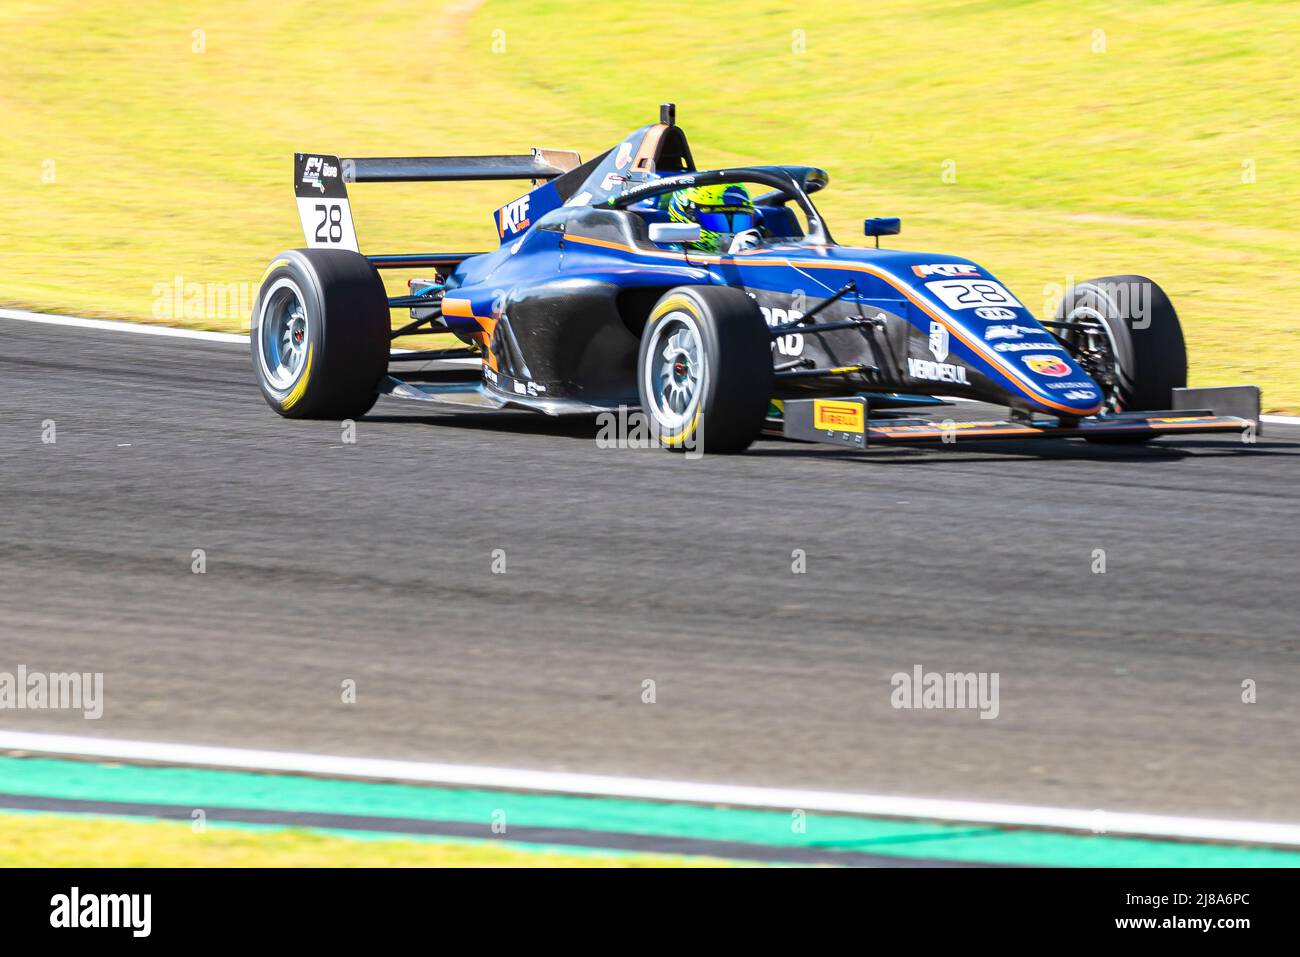 Sao Paulo, Brazil. 31st July, 2022. Drivers in action during the BRB  Formula 4 Brazil race at Interlagos racetrack. July 31, 2022, Sao Paulo,  Brazil: Drivers in action during the BRB Formula